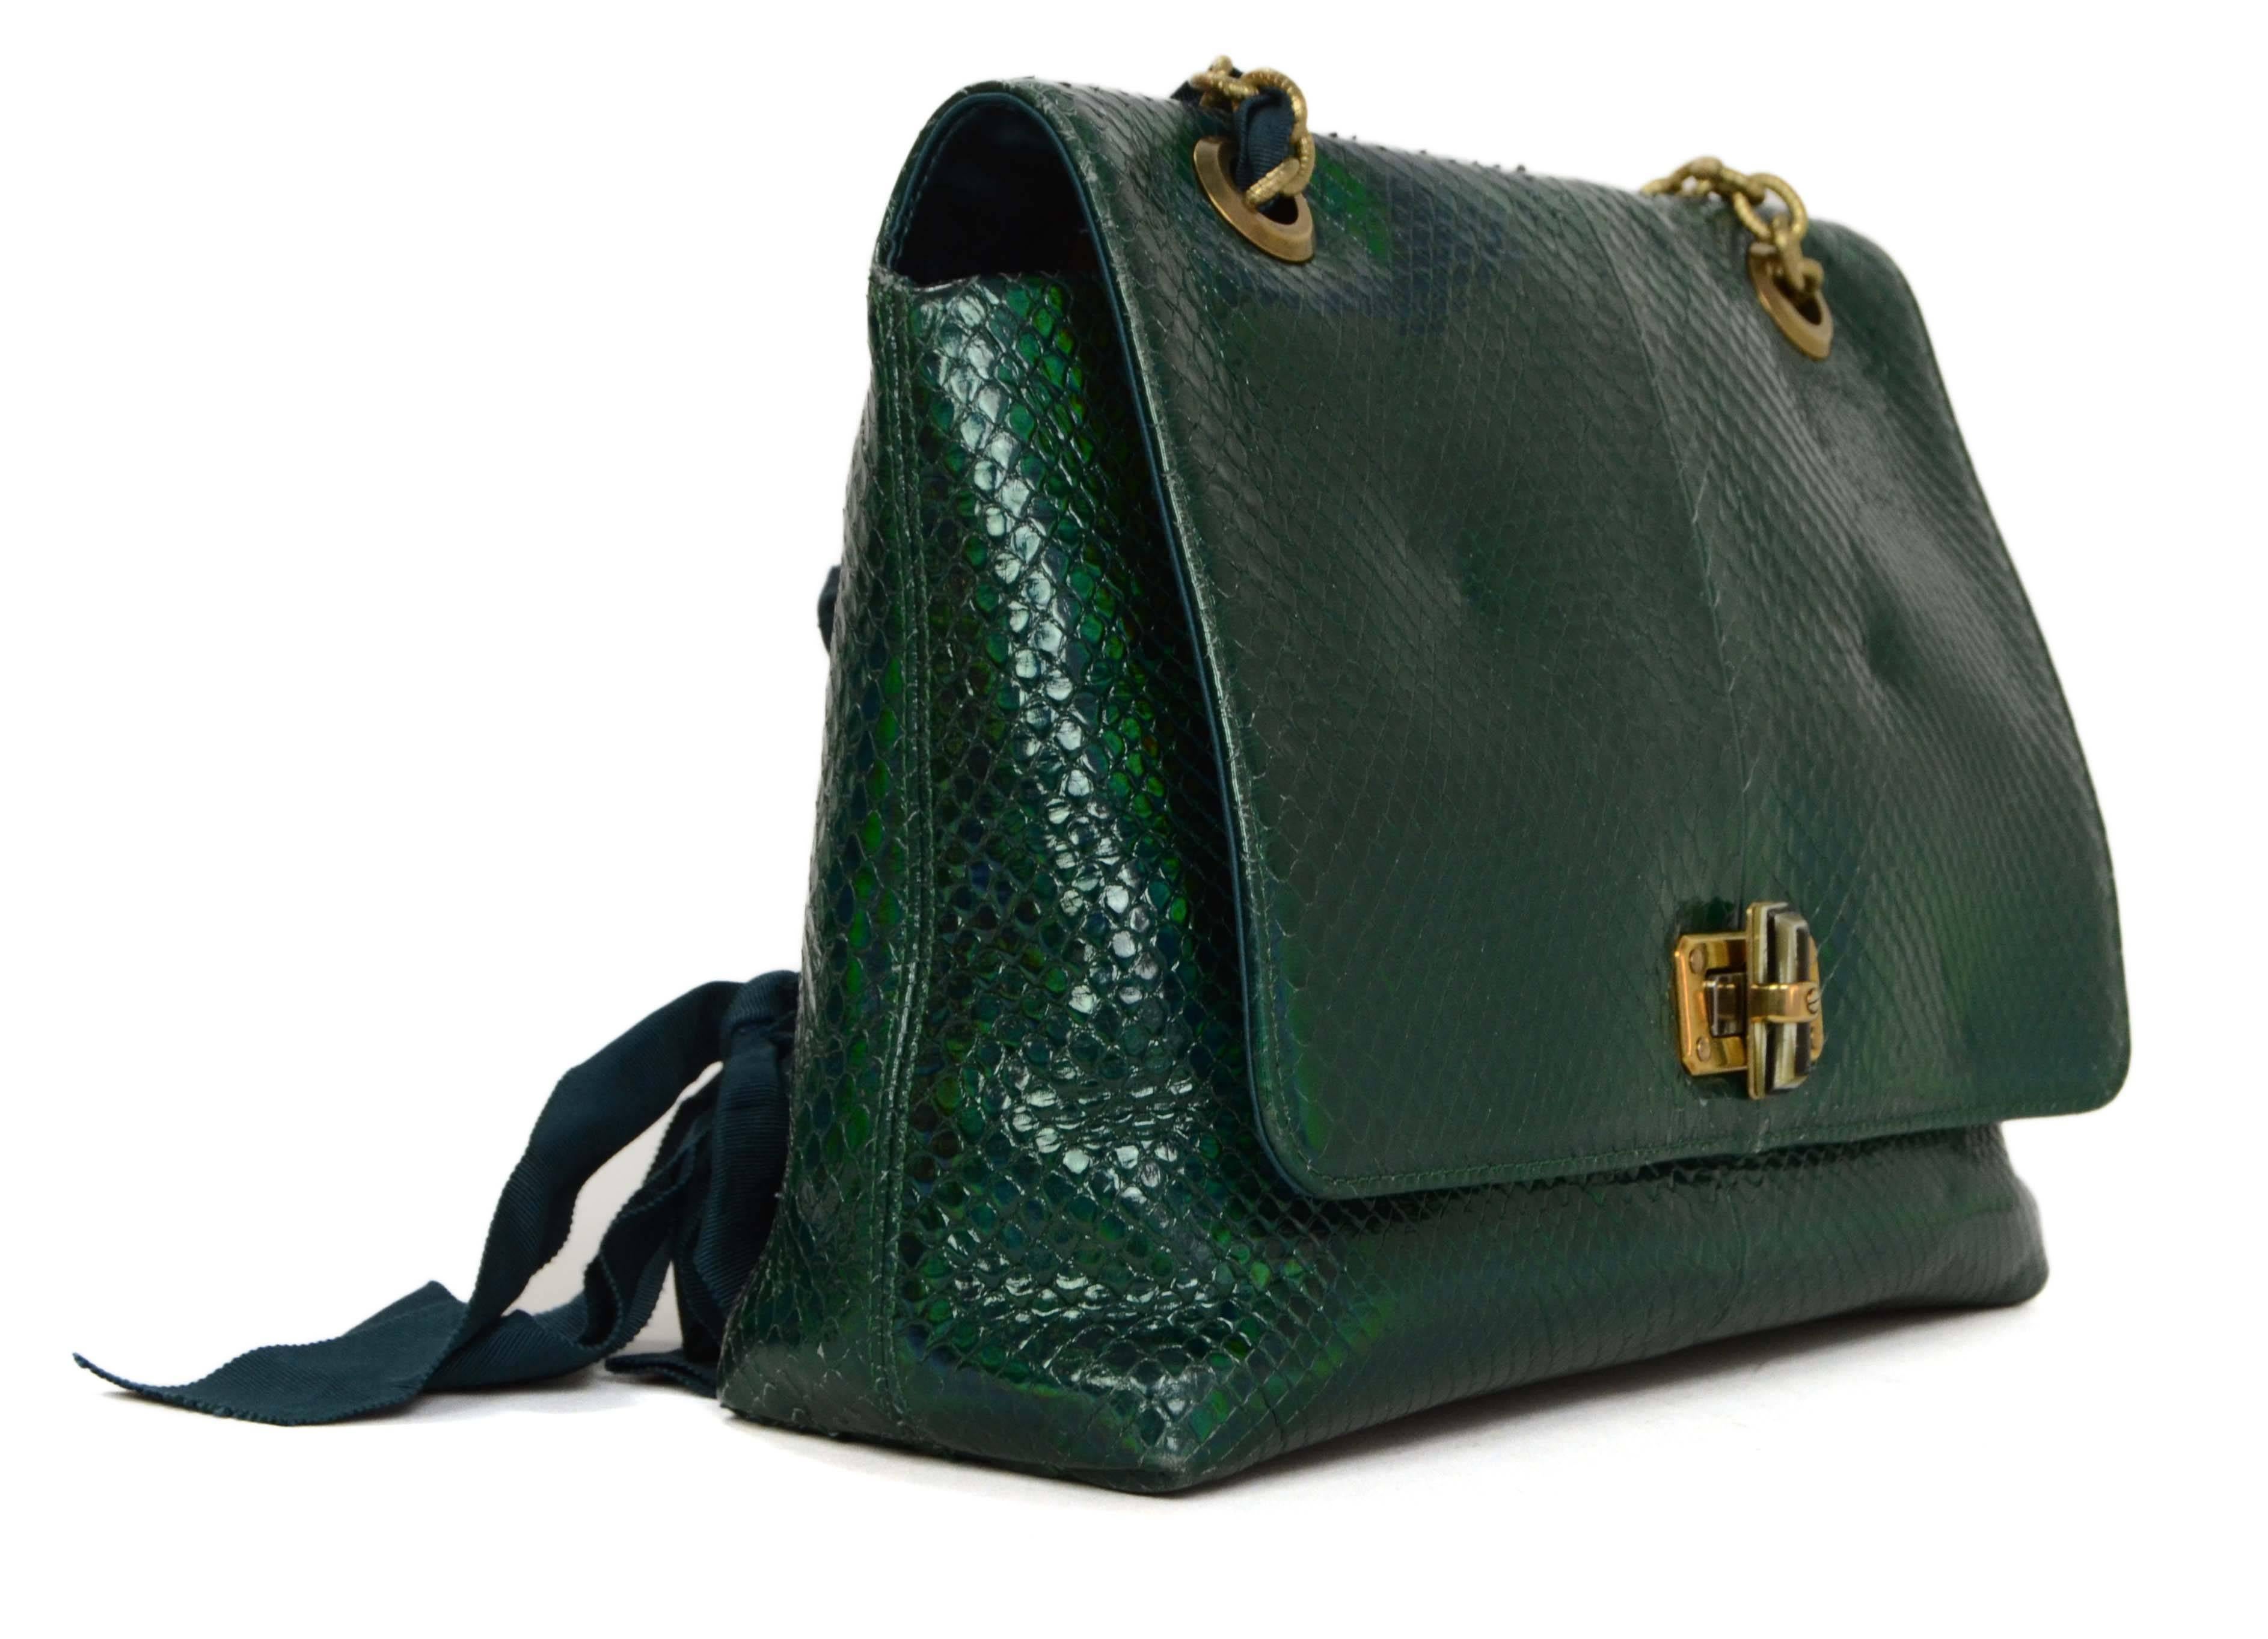 Lanvin Iridescent Green Pyton Happy Bag 
Features adjustable ribbon-woven chain link shoulder straps
Made In: Italy
Color: Iridescent green
Hardware: Goldtone
Materials: Python, grosgrain, and metal
Lining: Green satin
Closure/Opening: Flap